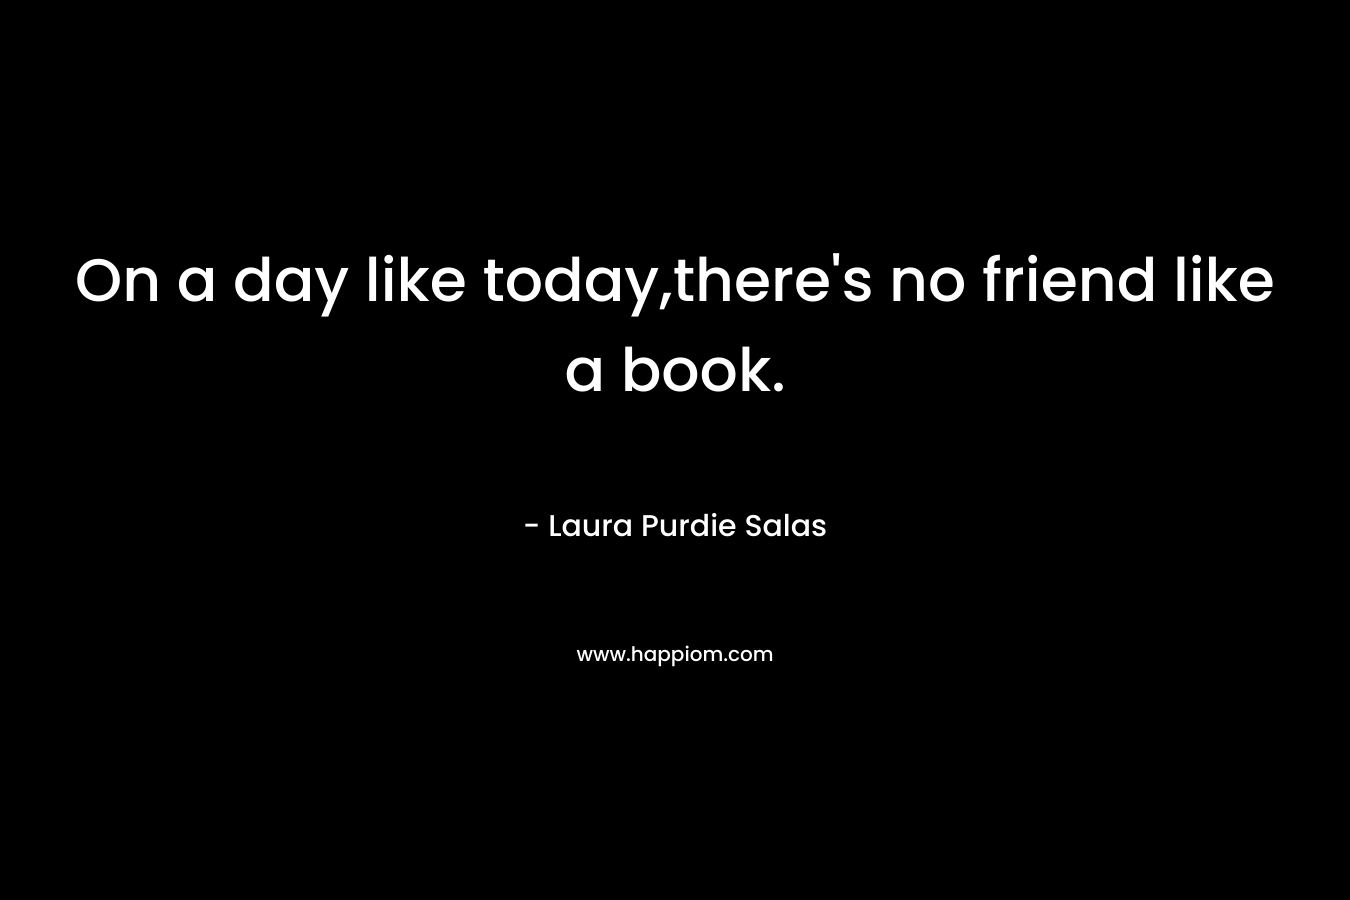 On a day like today,there's no friend like a book.